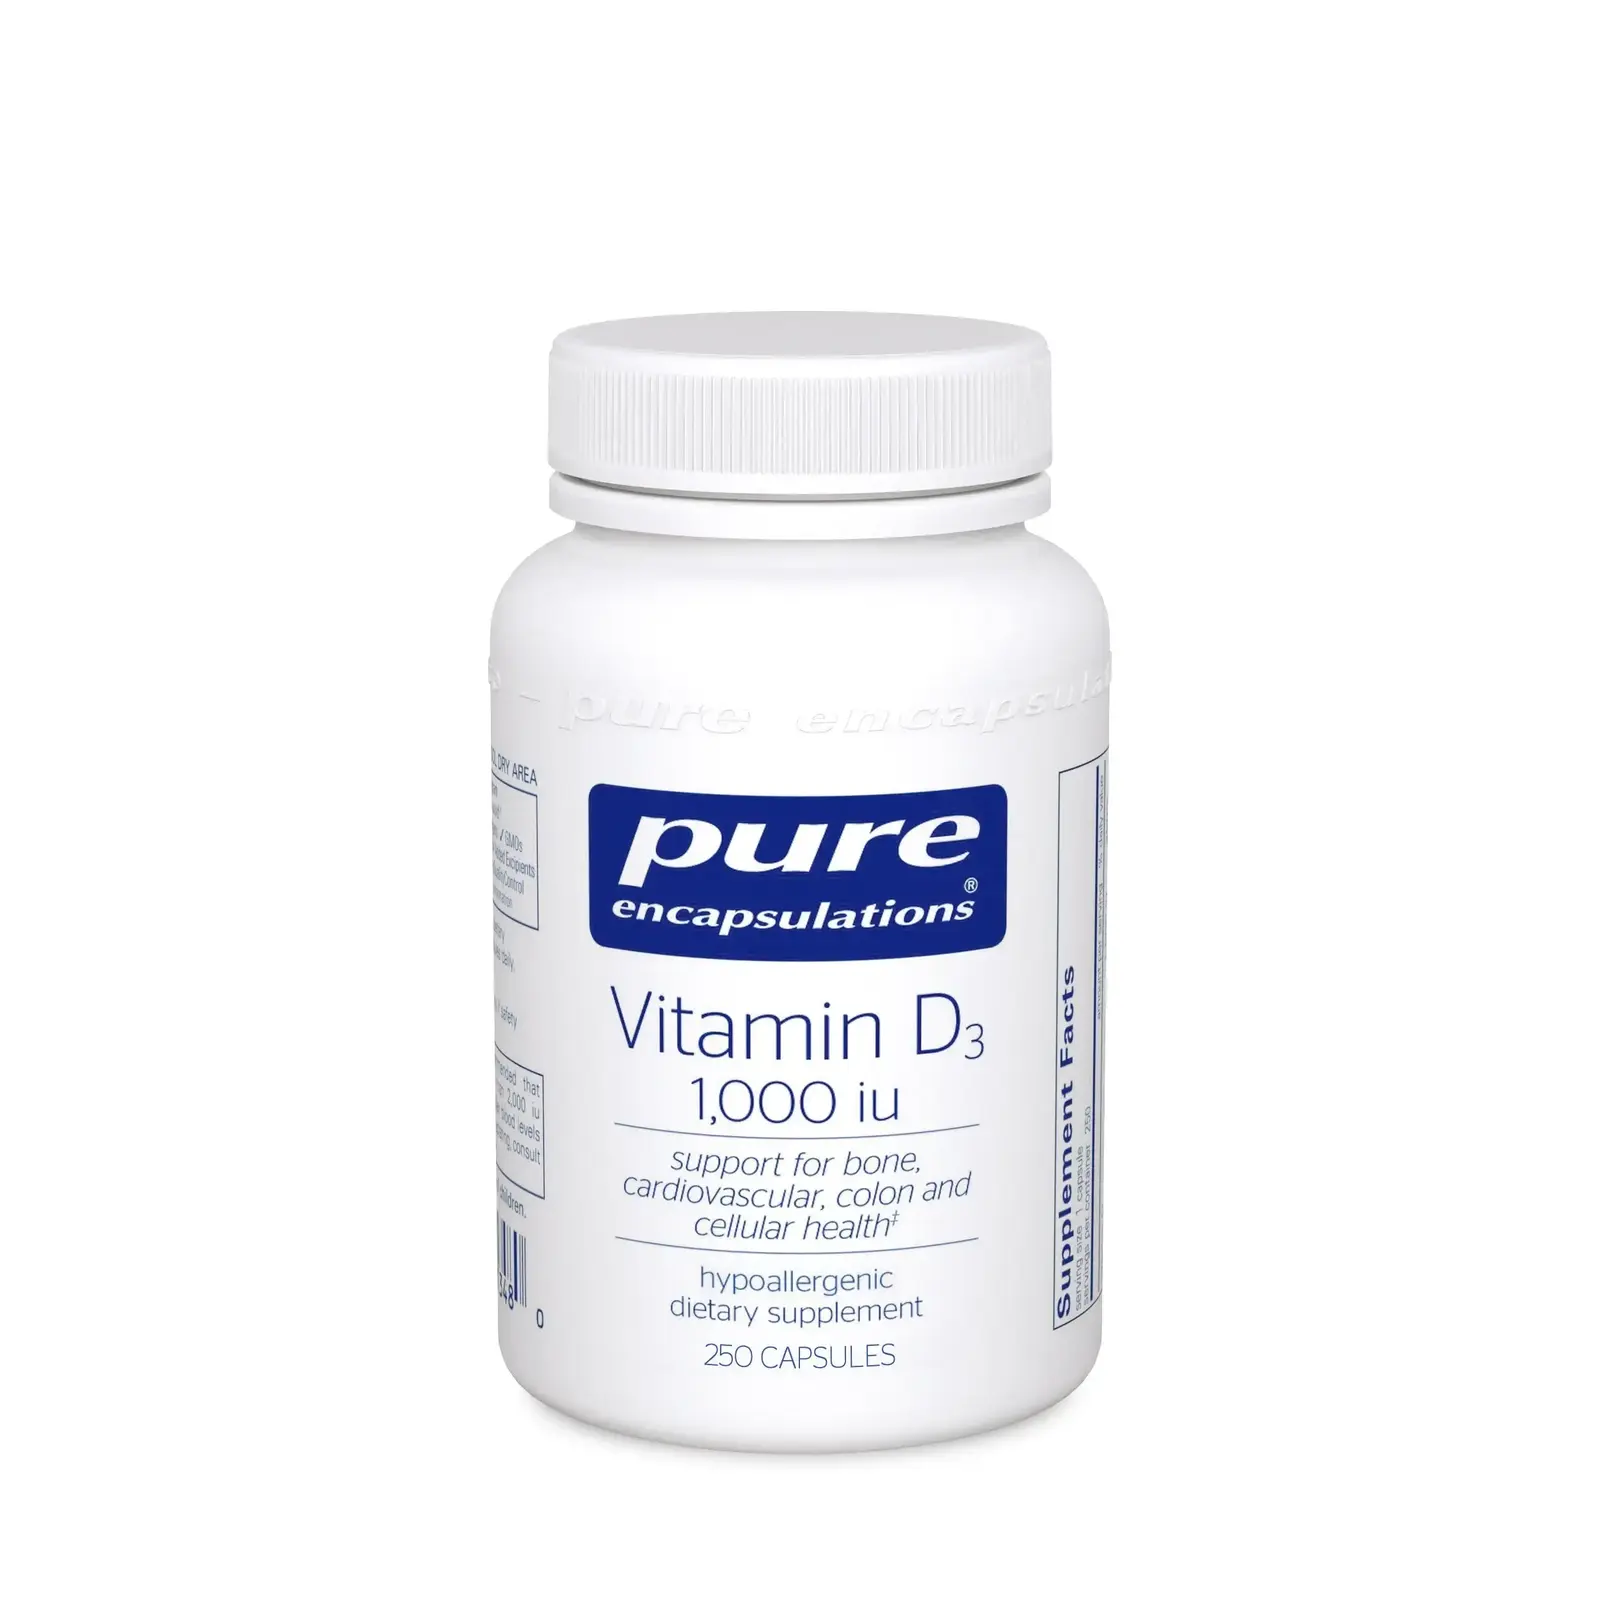 Vitamin D3 25 mcg (1,000 IU) (old price, combined with other variants)